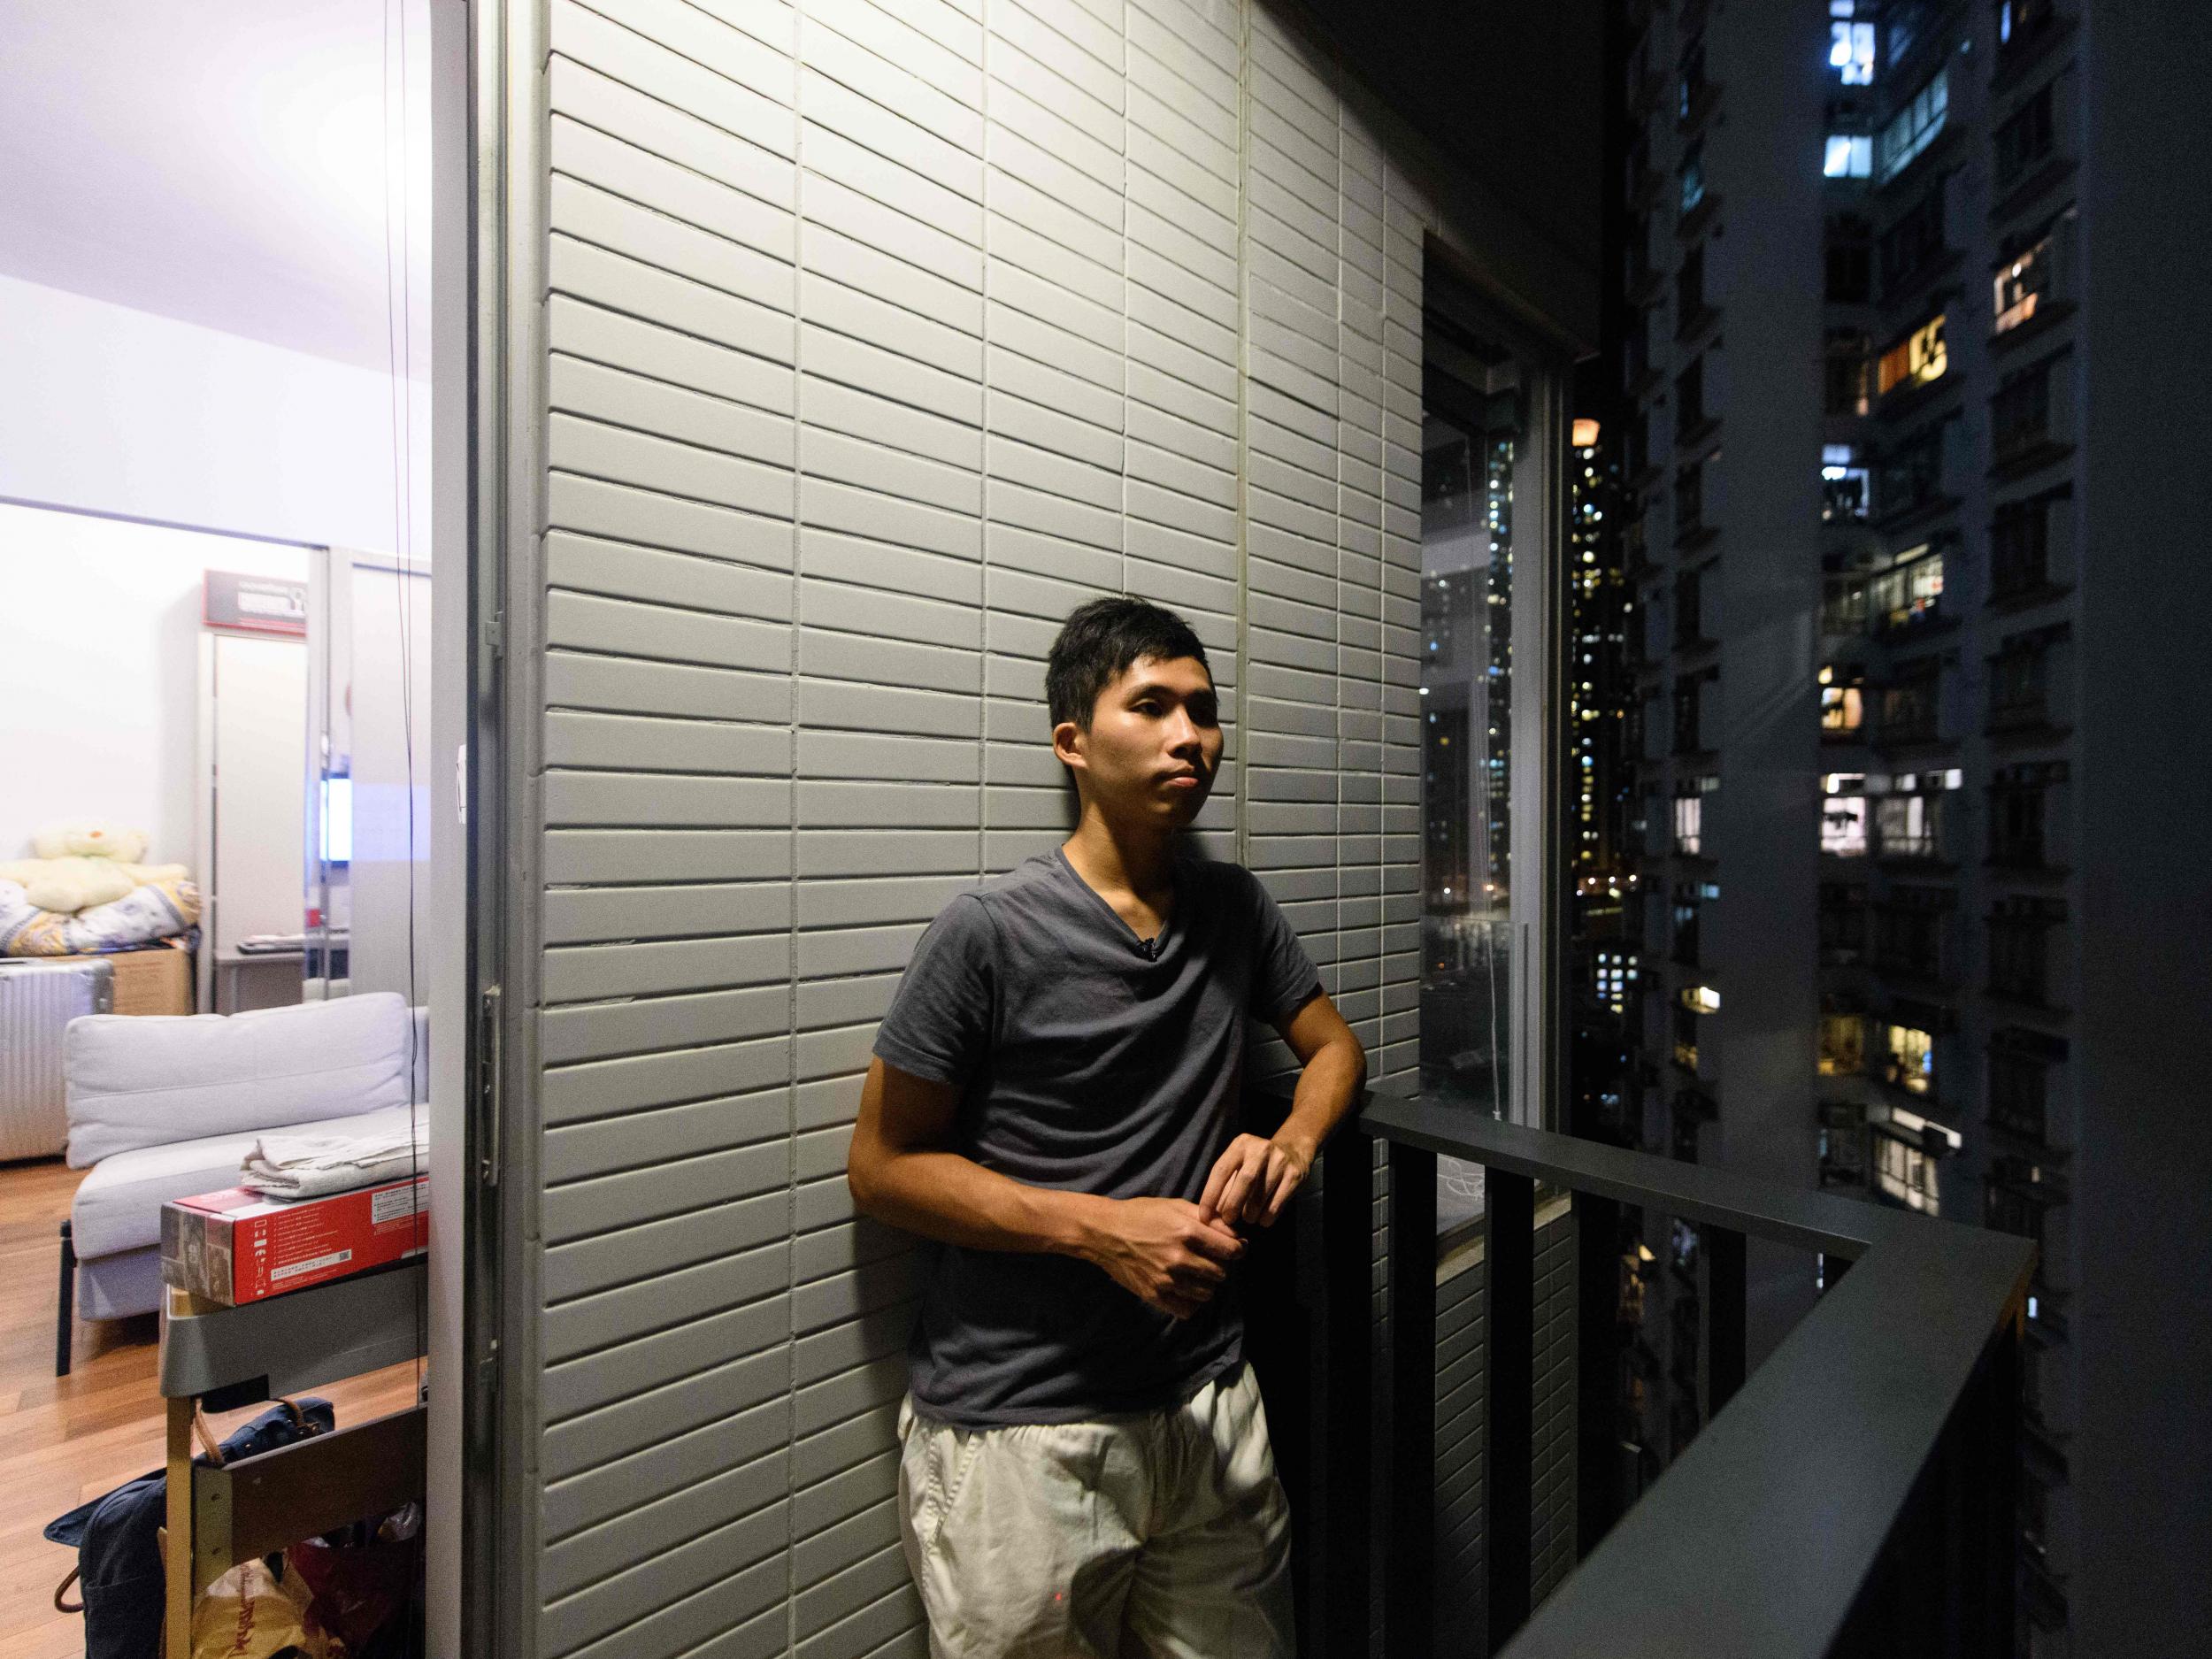 As housing prices spiral in Hong Kong, young professionals are living in ever-shrinking spaces